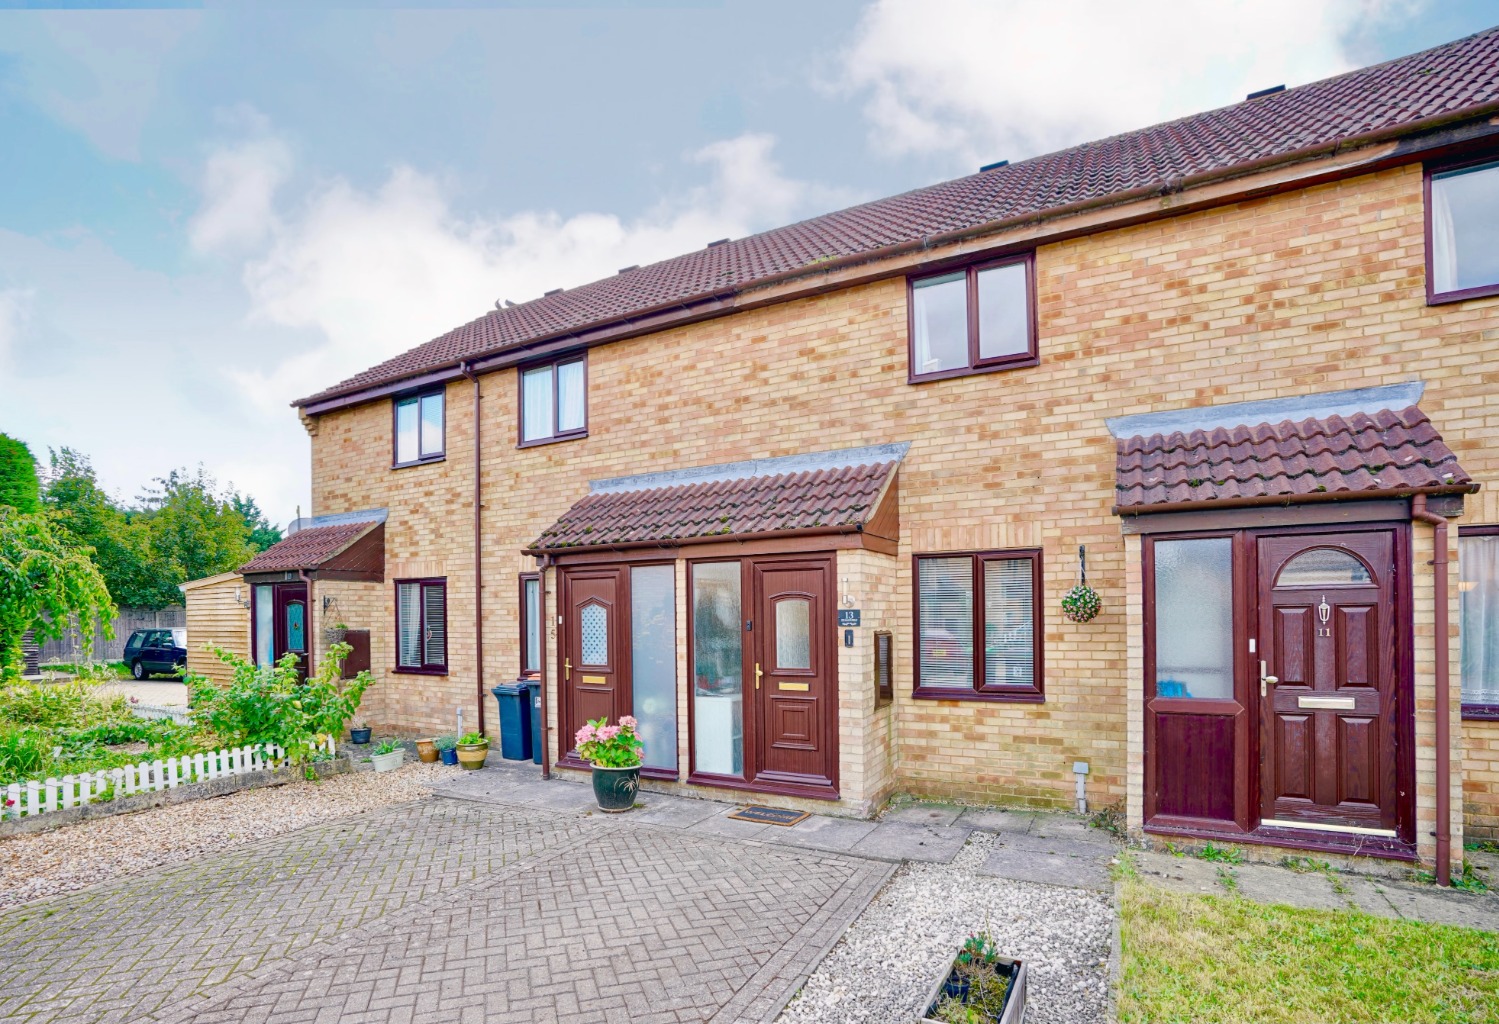 2 bed terraced house for sale in Swallowfield, Bedford - Property Image 1